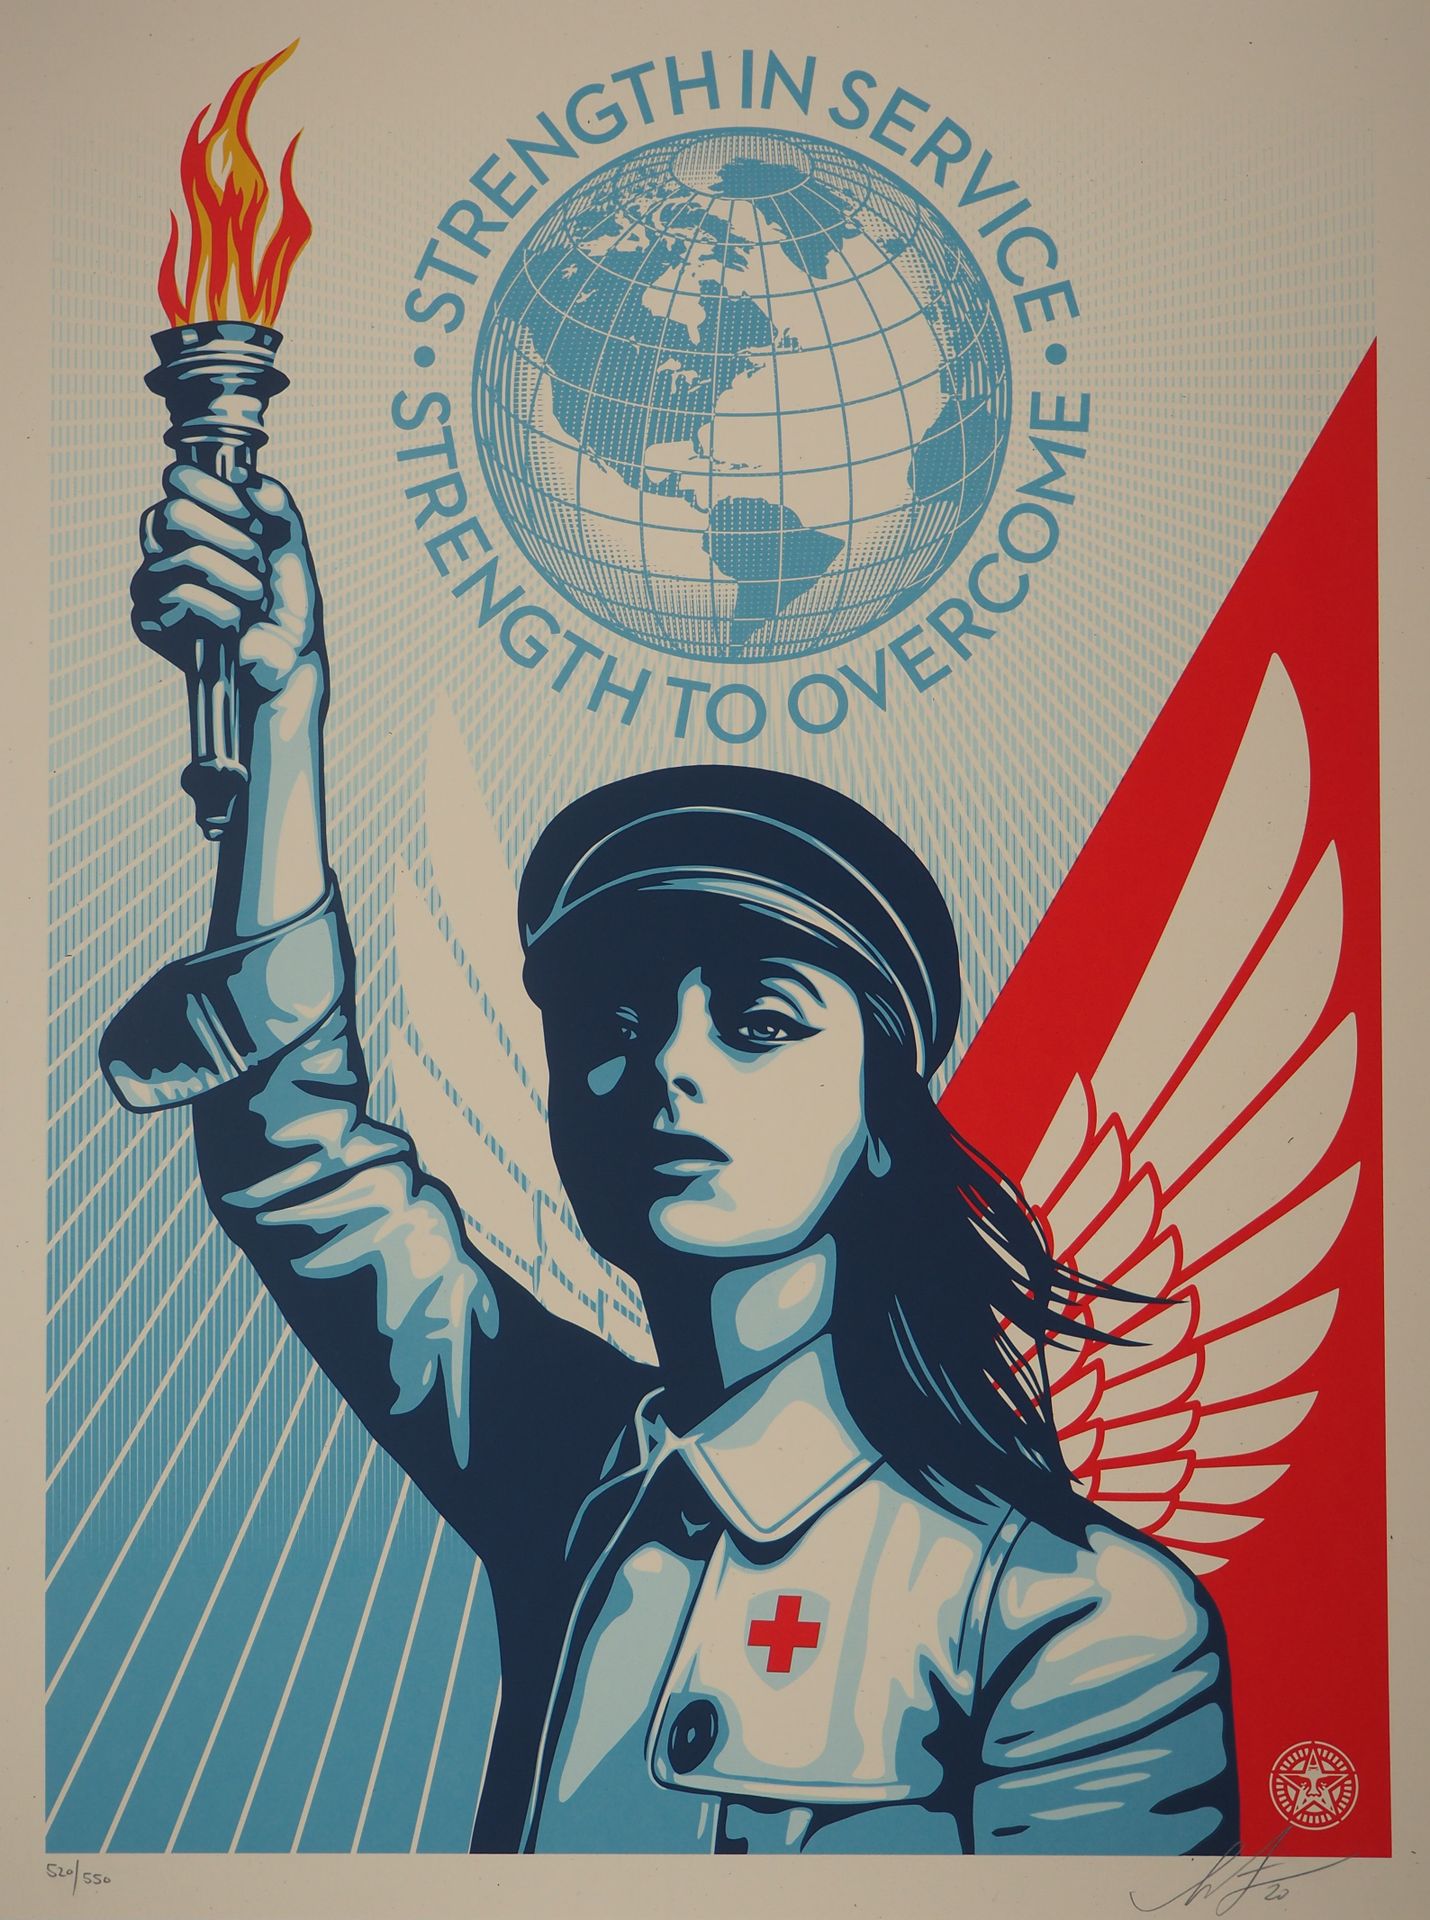 Shepard FAIREY Shepard Fairey dit Obey Giant (USA, 1970)

Angel of Hope and Stre&hellip;